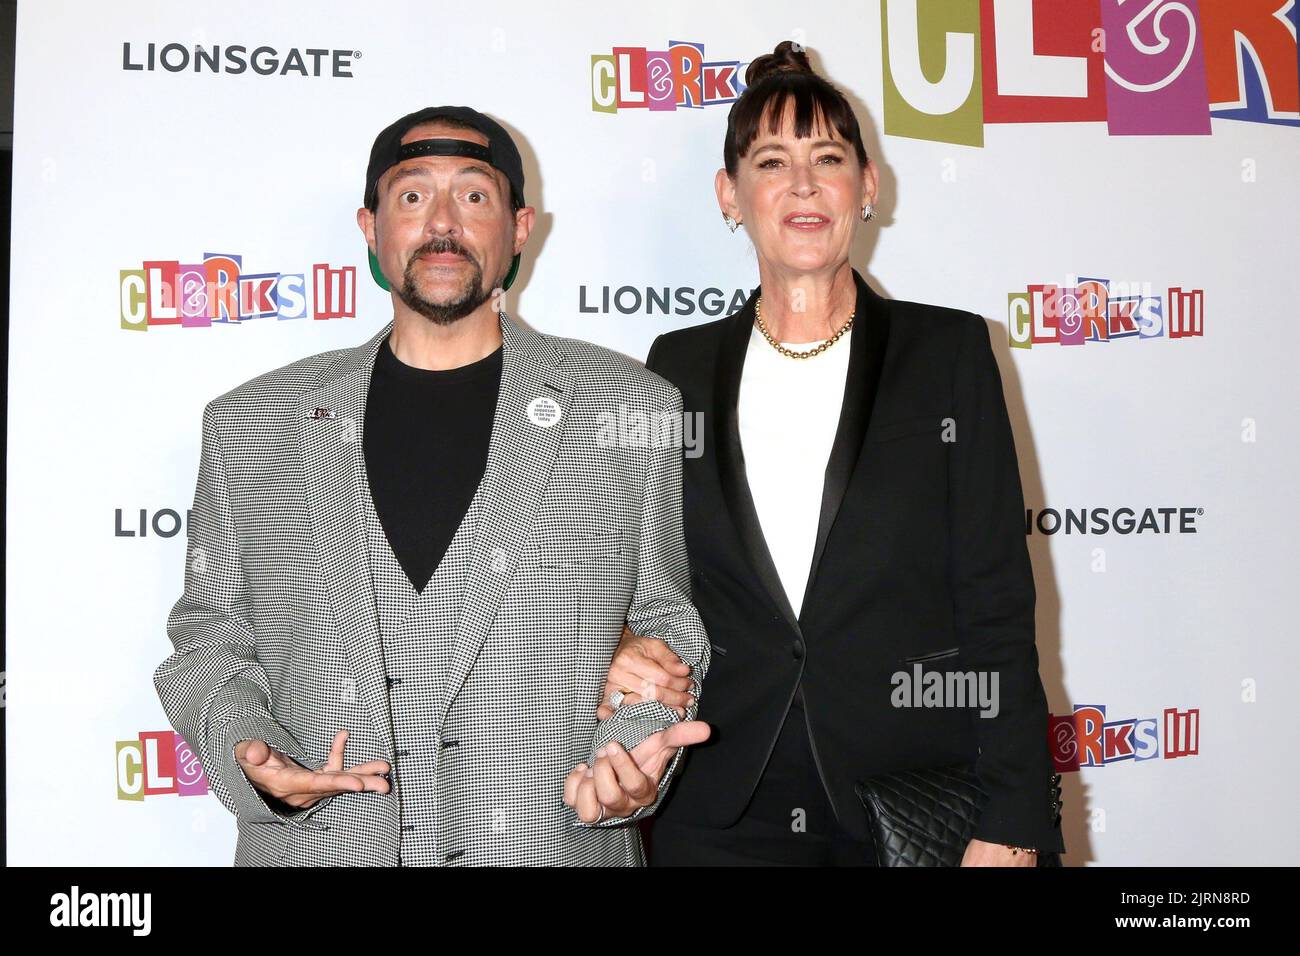 Los Angeles, CA. 24th Aug, 2022. Kevin Smith, Jennifer Schwalbach Smith at arrivals for CLERKS III Premiere, TCL Chinese Theatre, Los Angeles, CA August 24, 2022. Credit: Priscilla Grant/Everett Collection/Alamy Live News Stock Photo